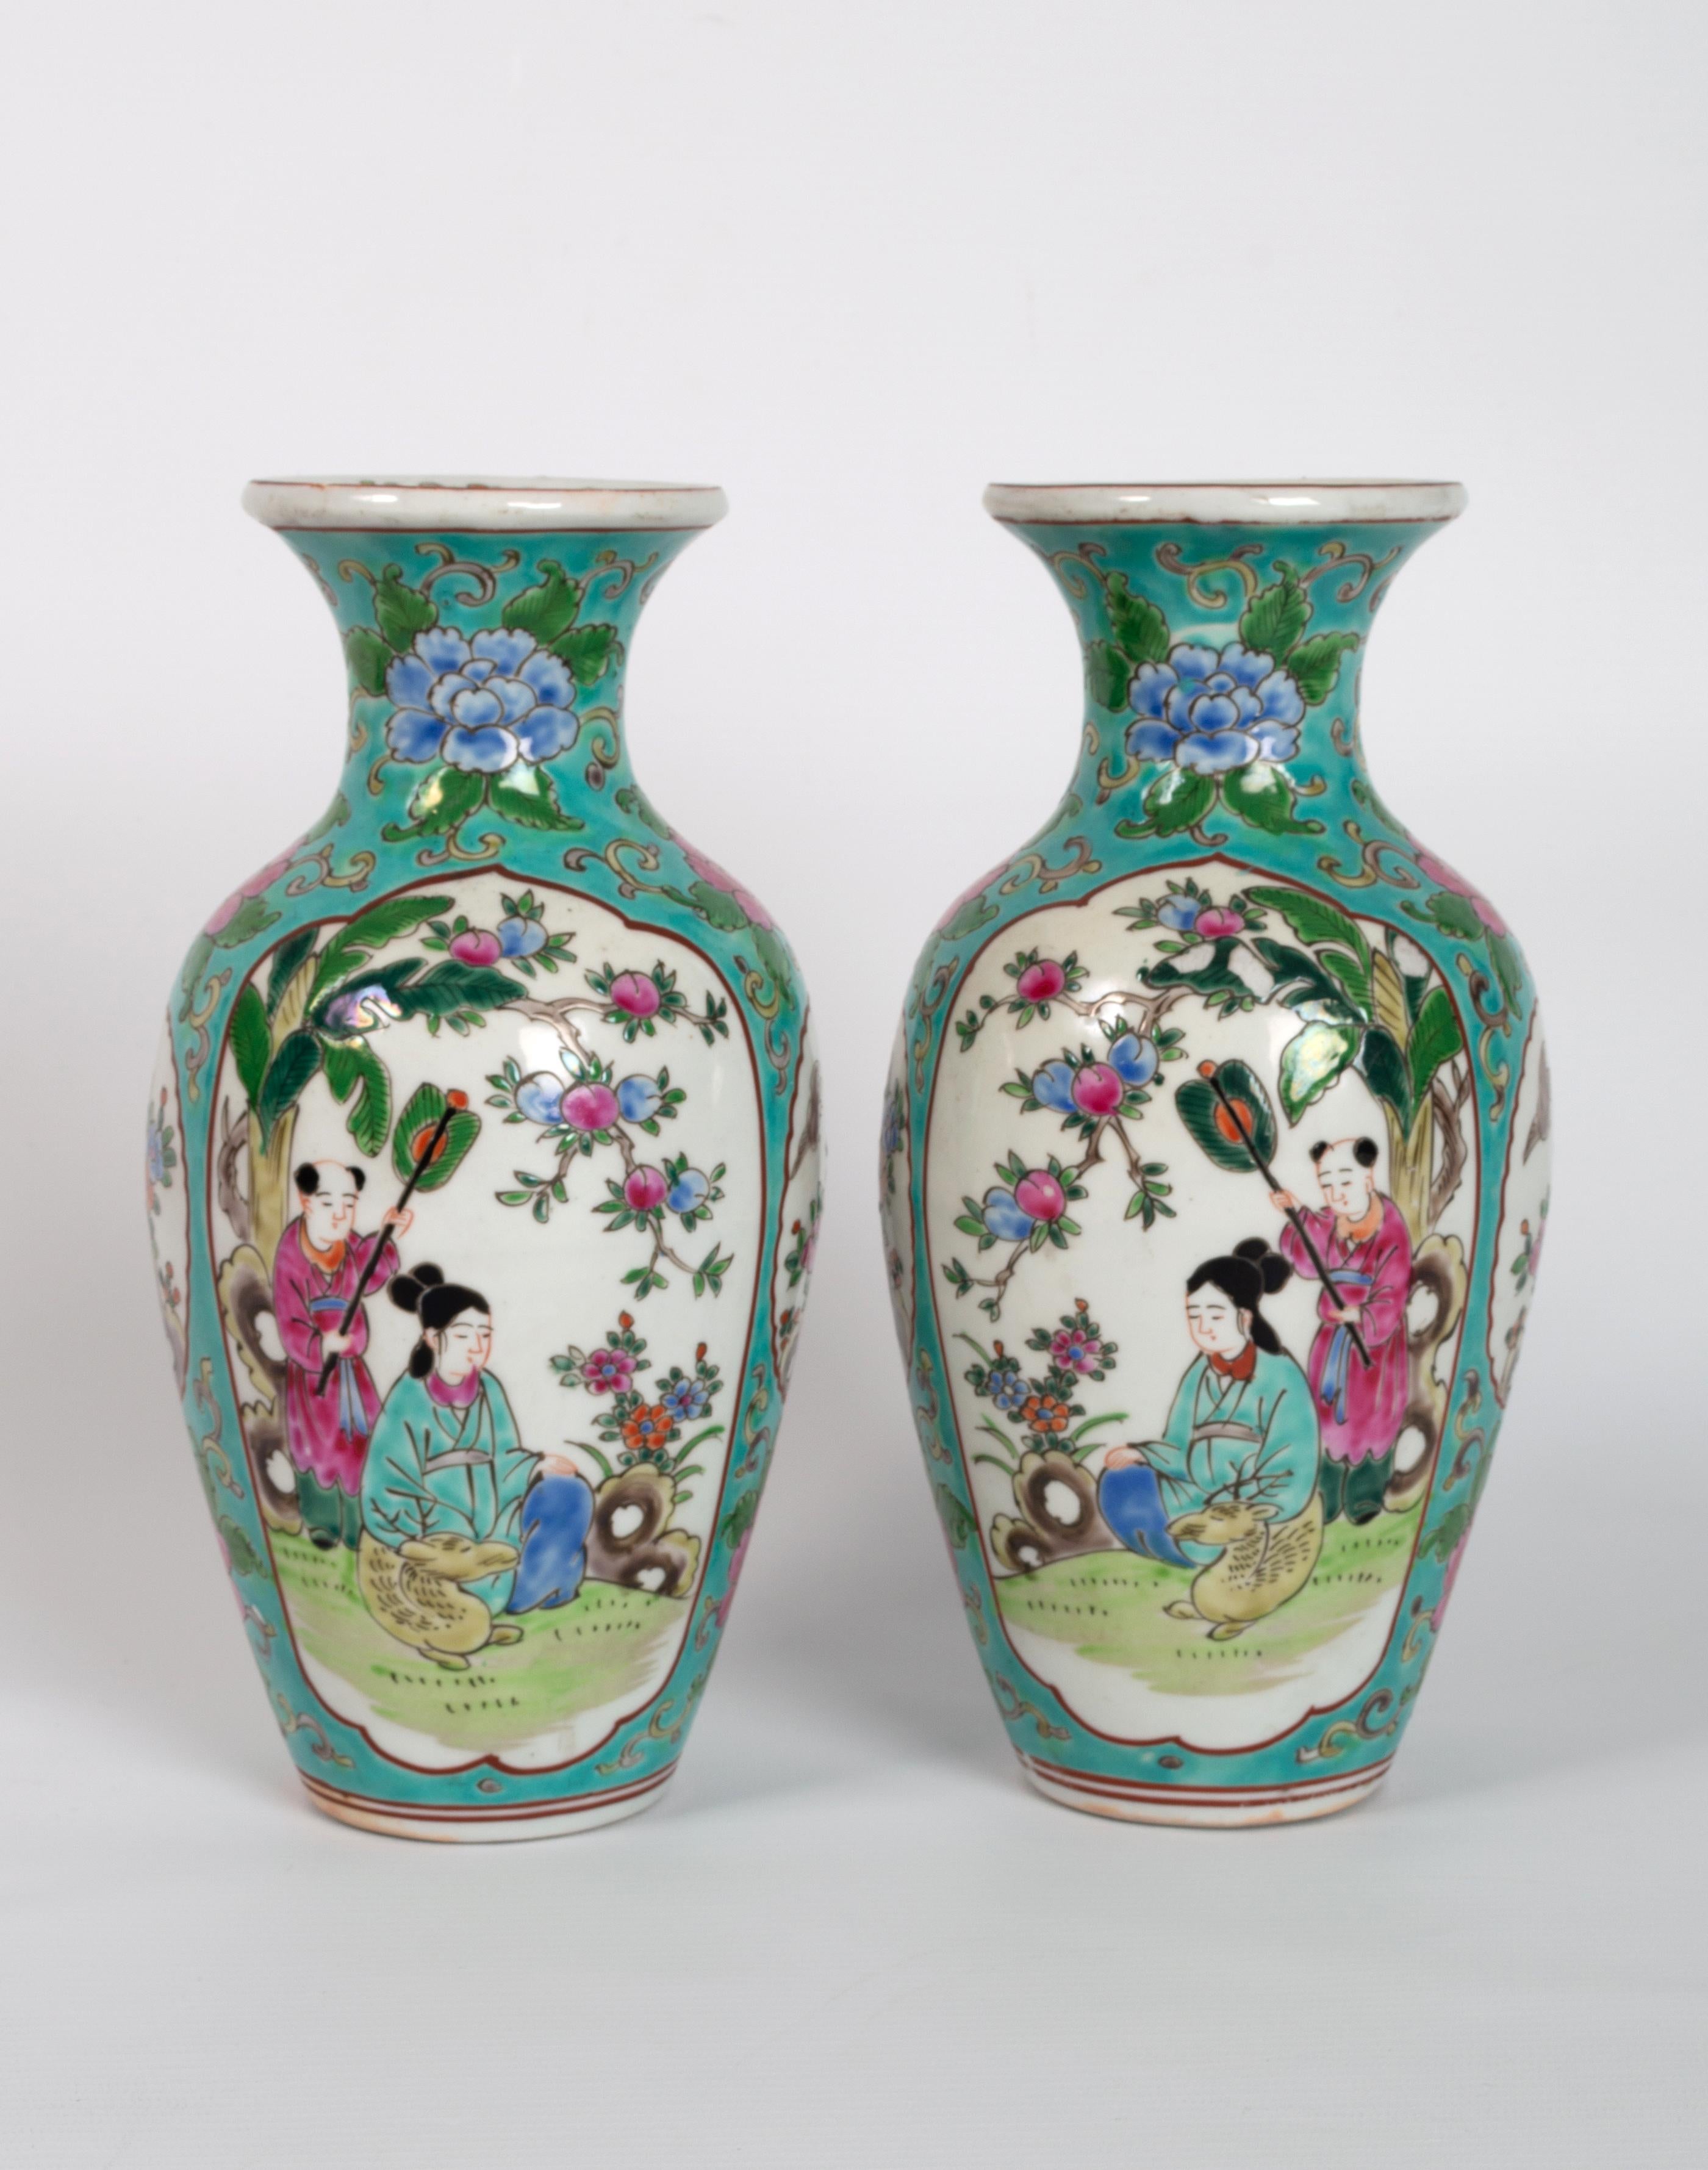 Pair Chinese Famille rose with turquoise ground vases C.1940.

Enamelled in famille rose palette with large blooms borne around a border of curling tendrils. the central body of the vases depicting a fanned seated woman in a garden under a plum